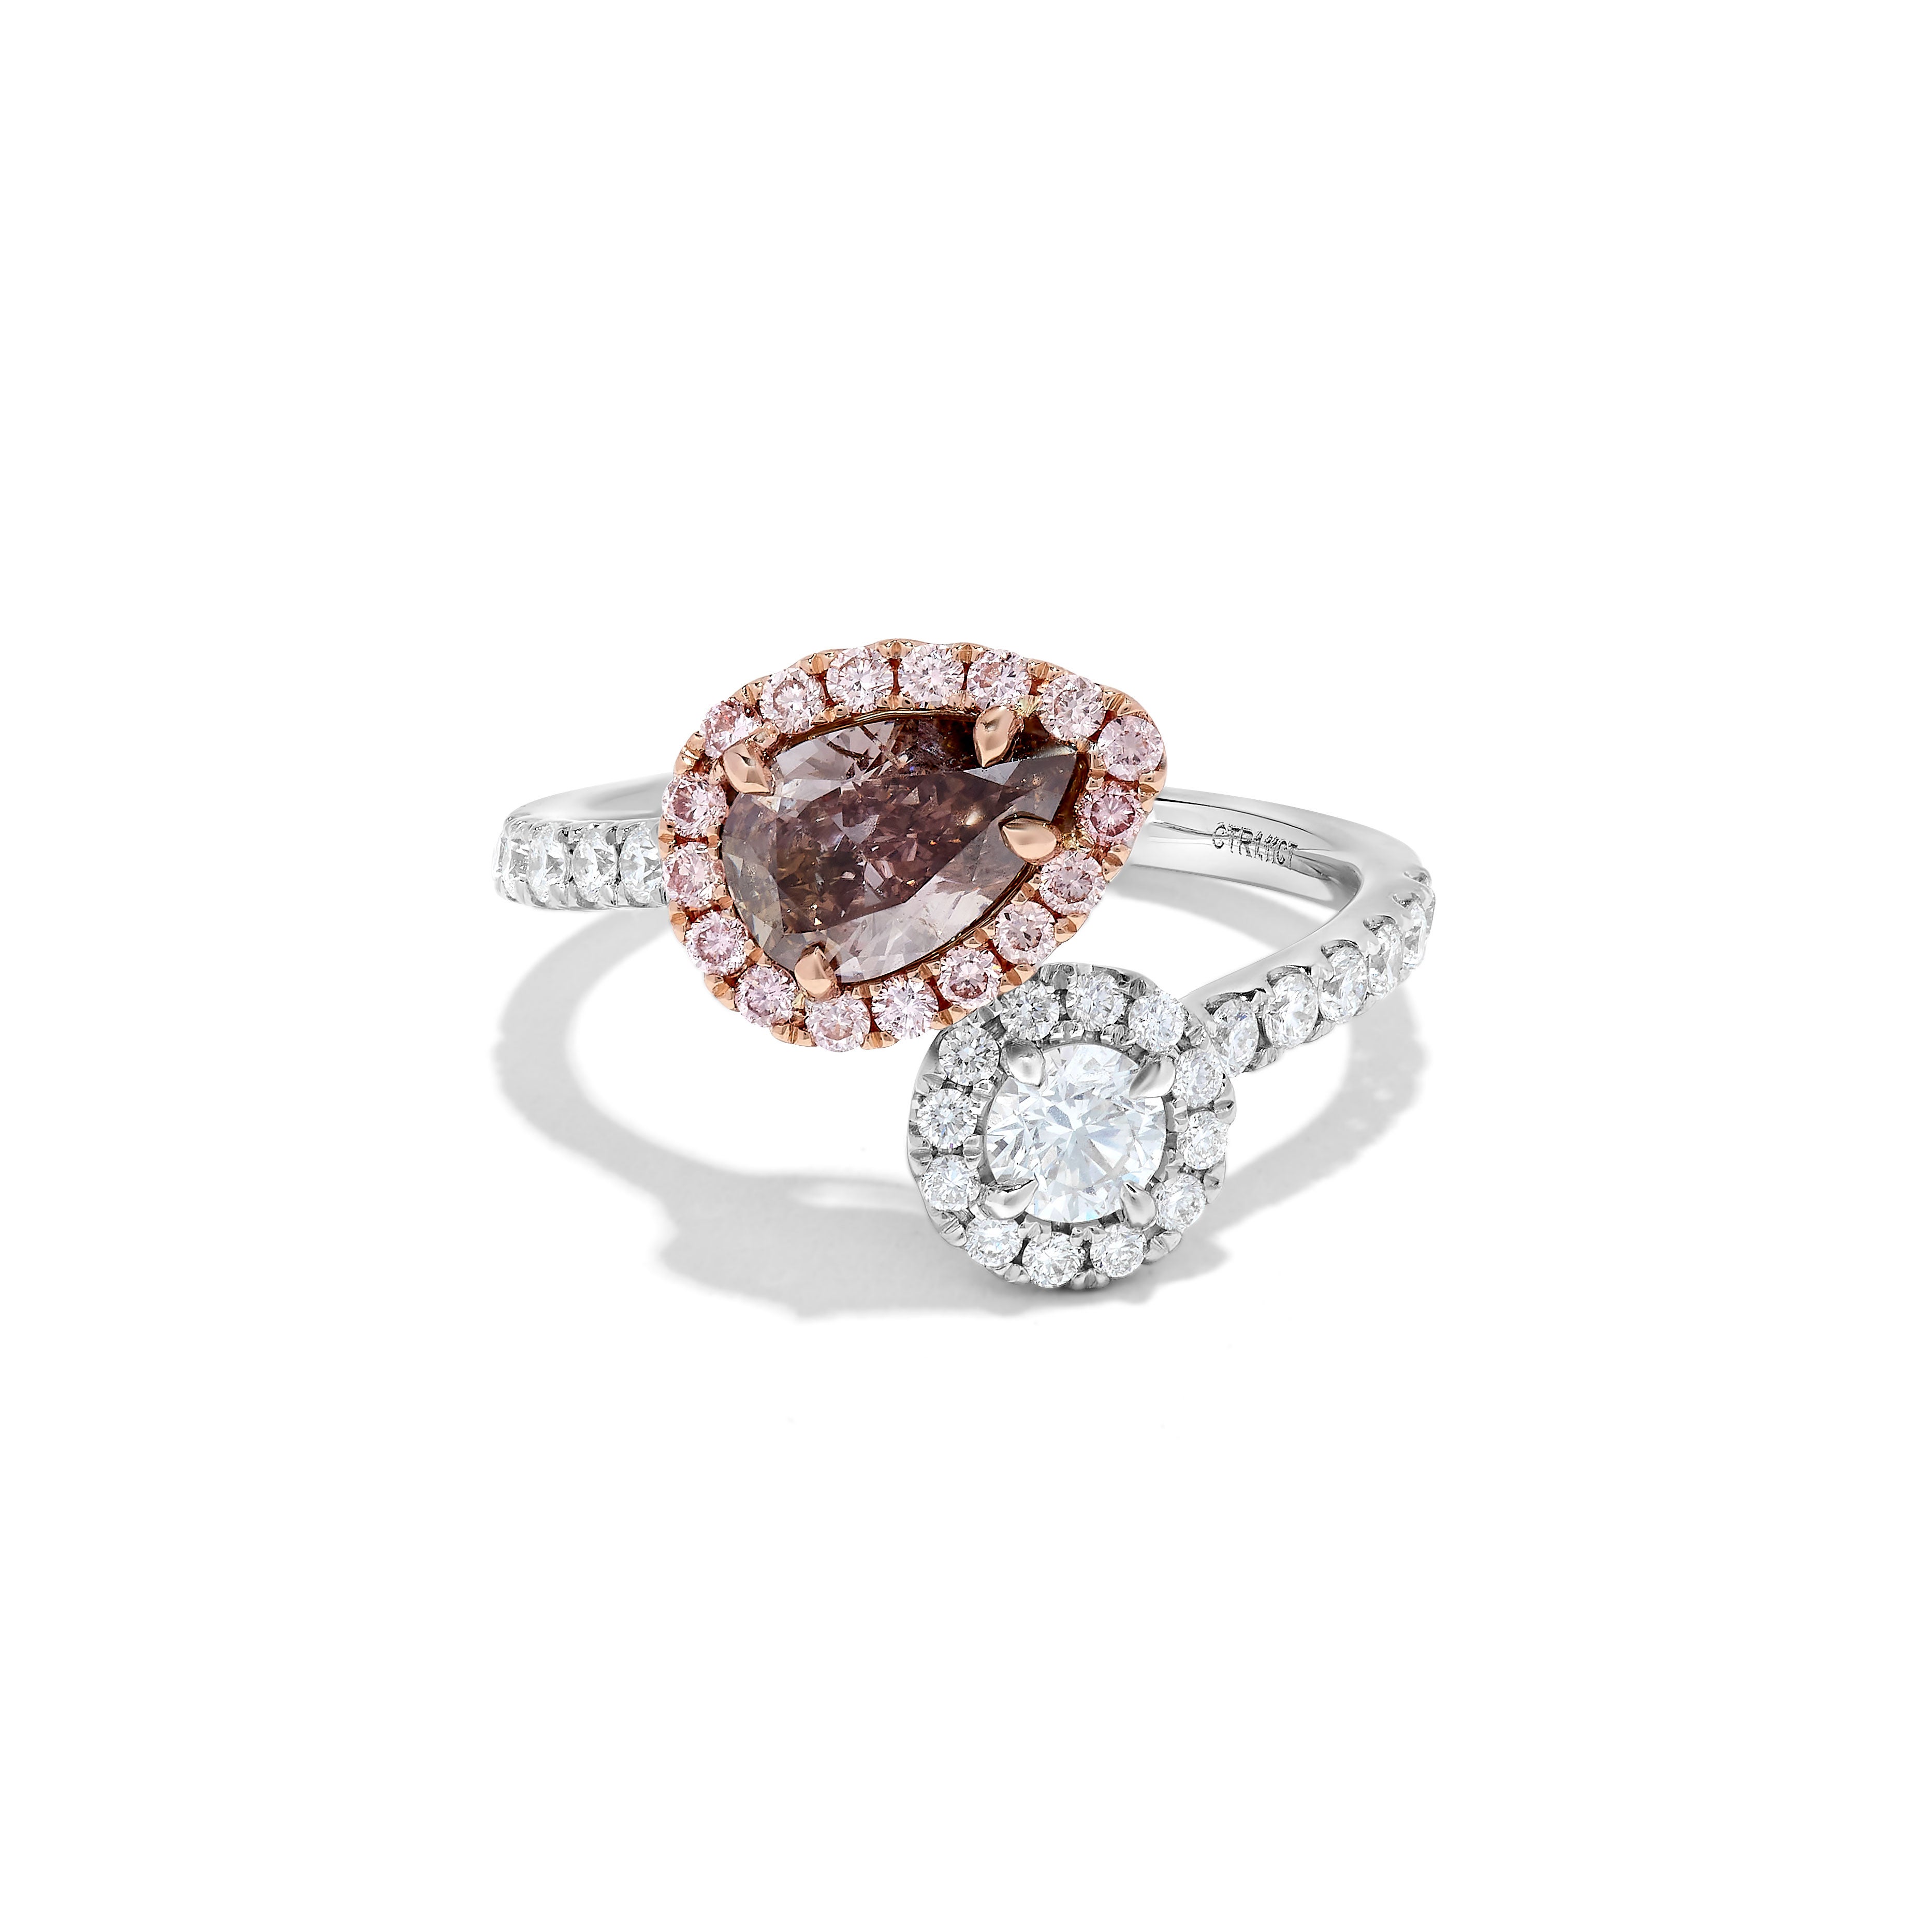 GIA Certified Natural Pink Pear and White Diamond 1.98 Carat TW Rose Gold Ring